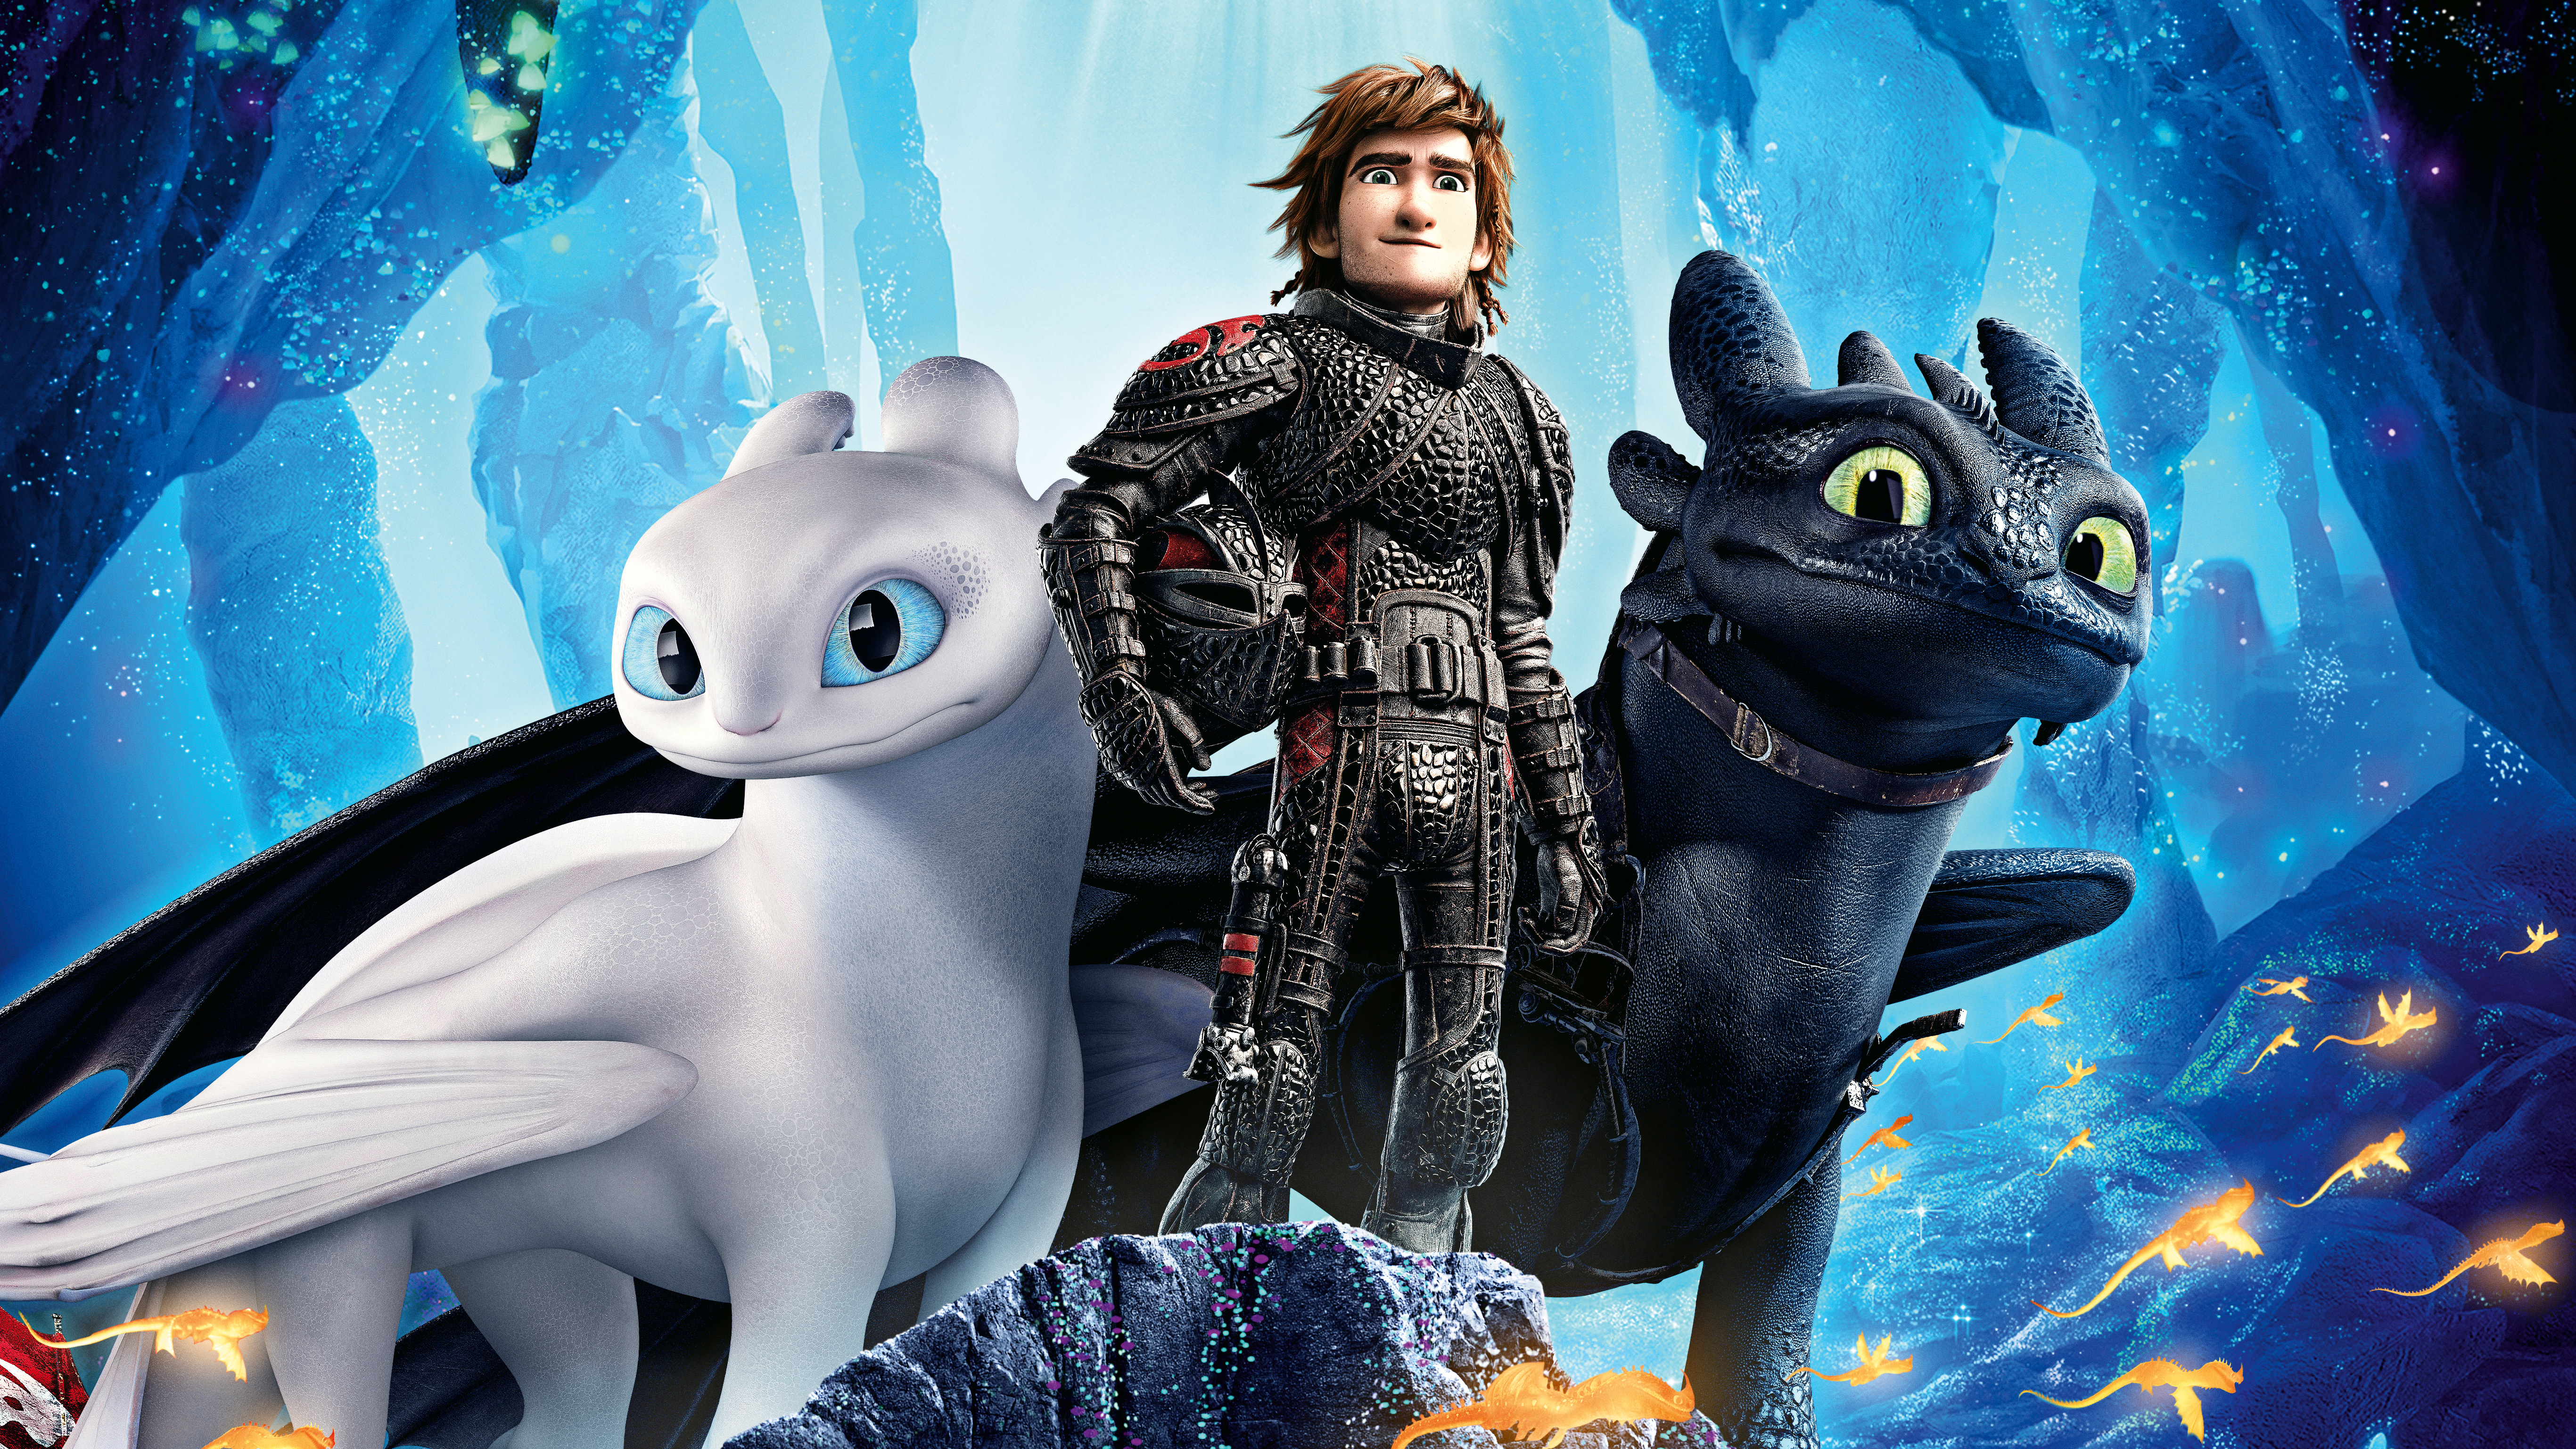 How To Train Your Dragon The Hidden World 4K 8K Wallpapers